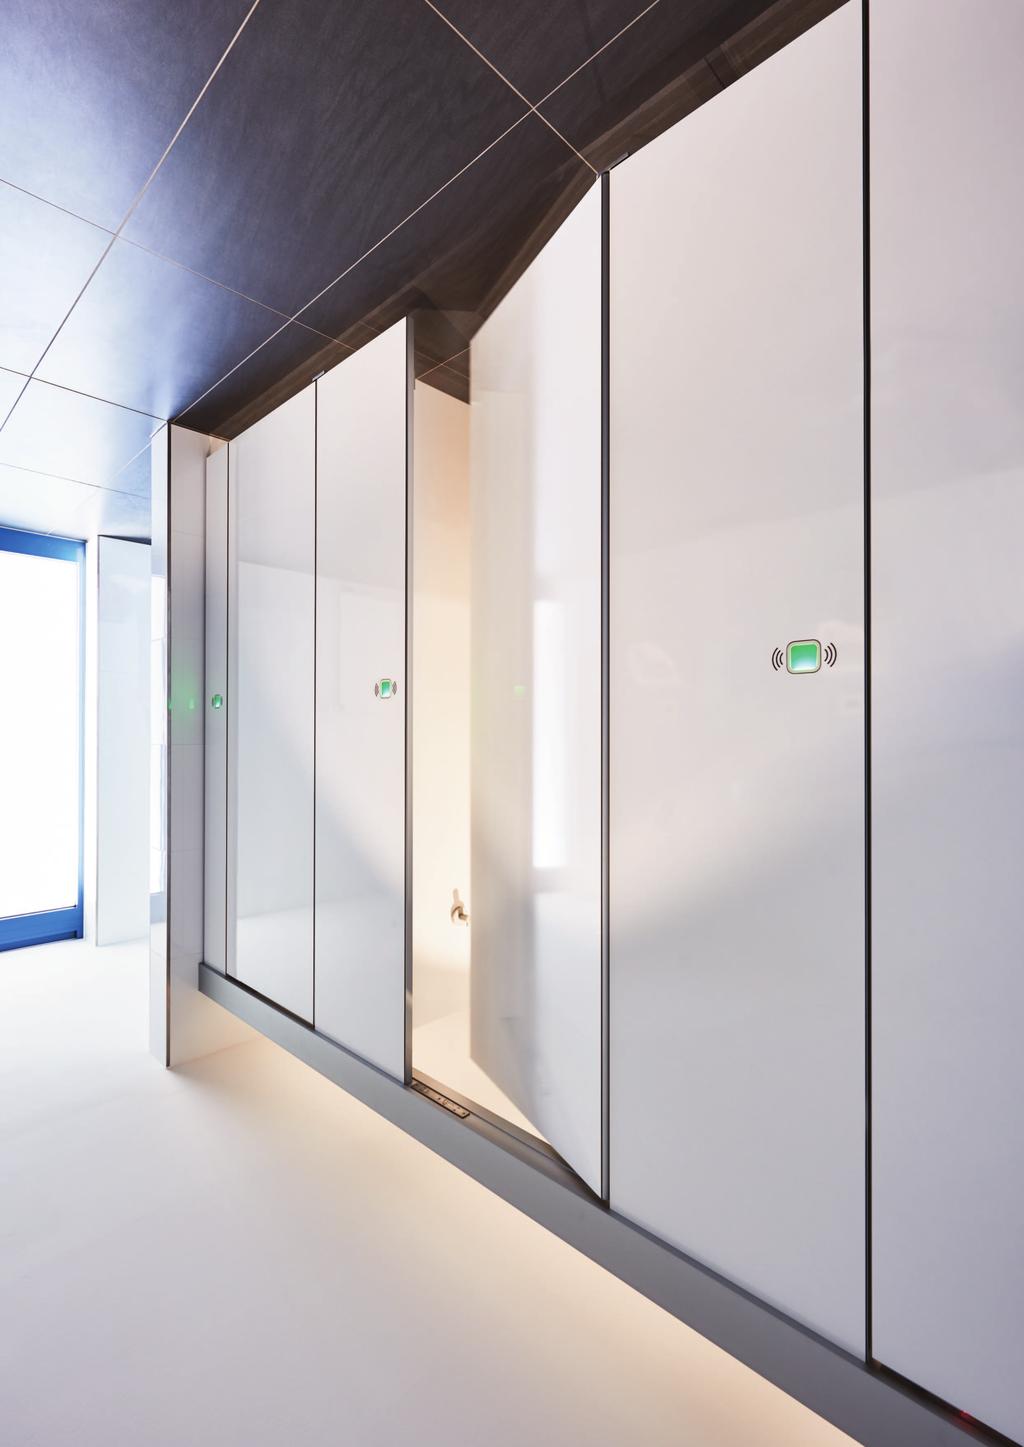 This new WC partition wall means you can open and close the cubicle door without touching it, thanks to the aid of modern LED and sensor technology.